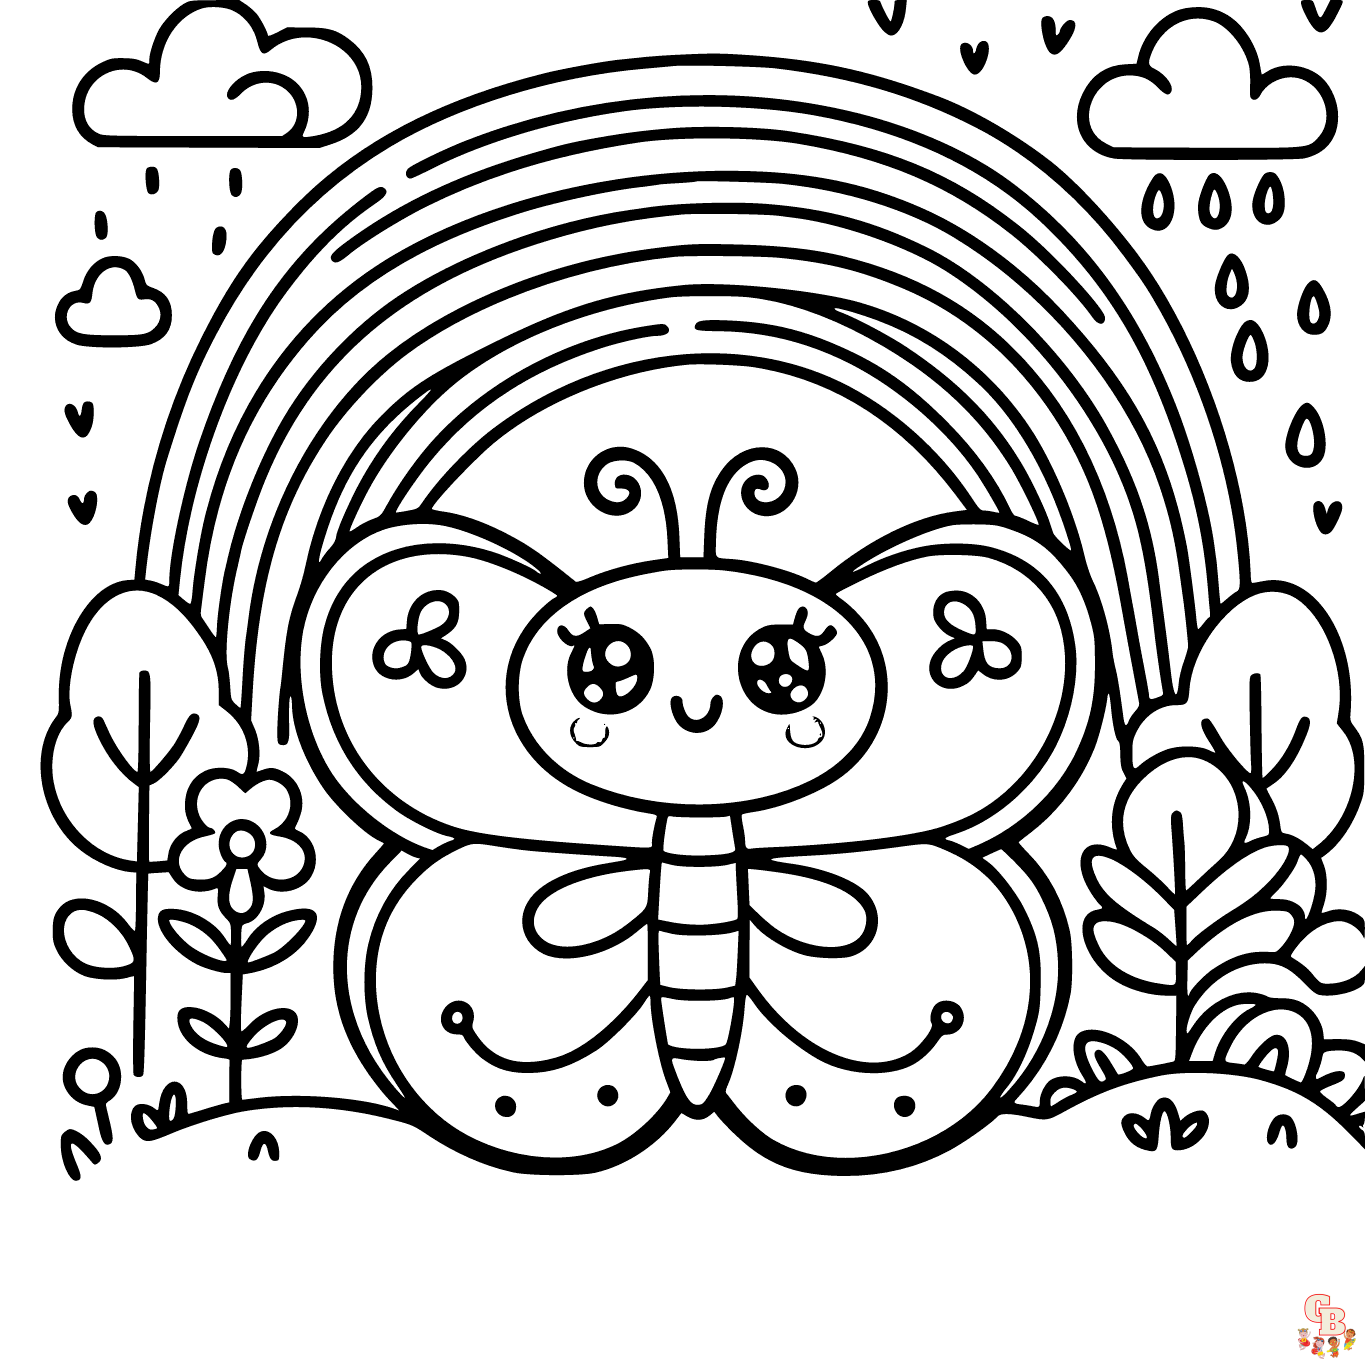 rainbow with butterflies coloring page